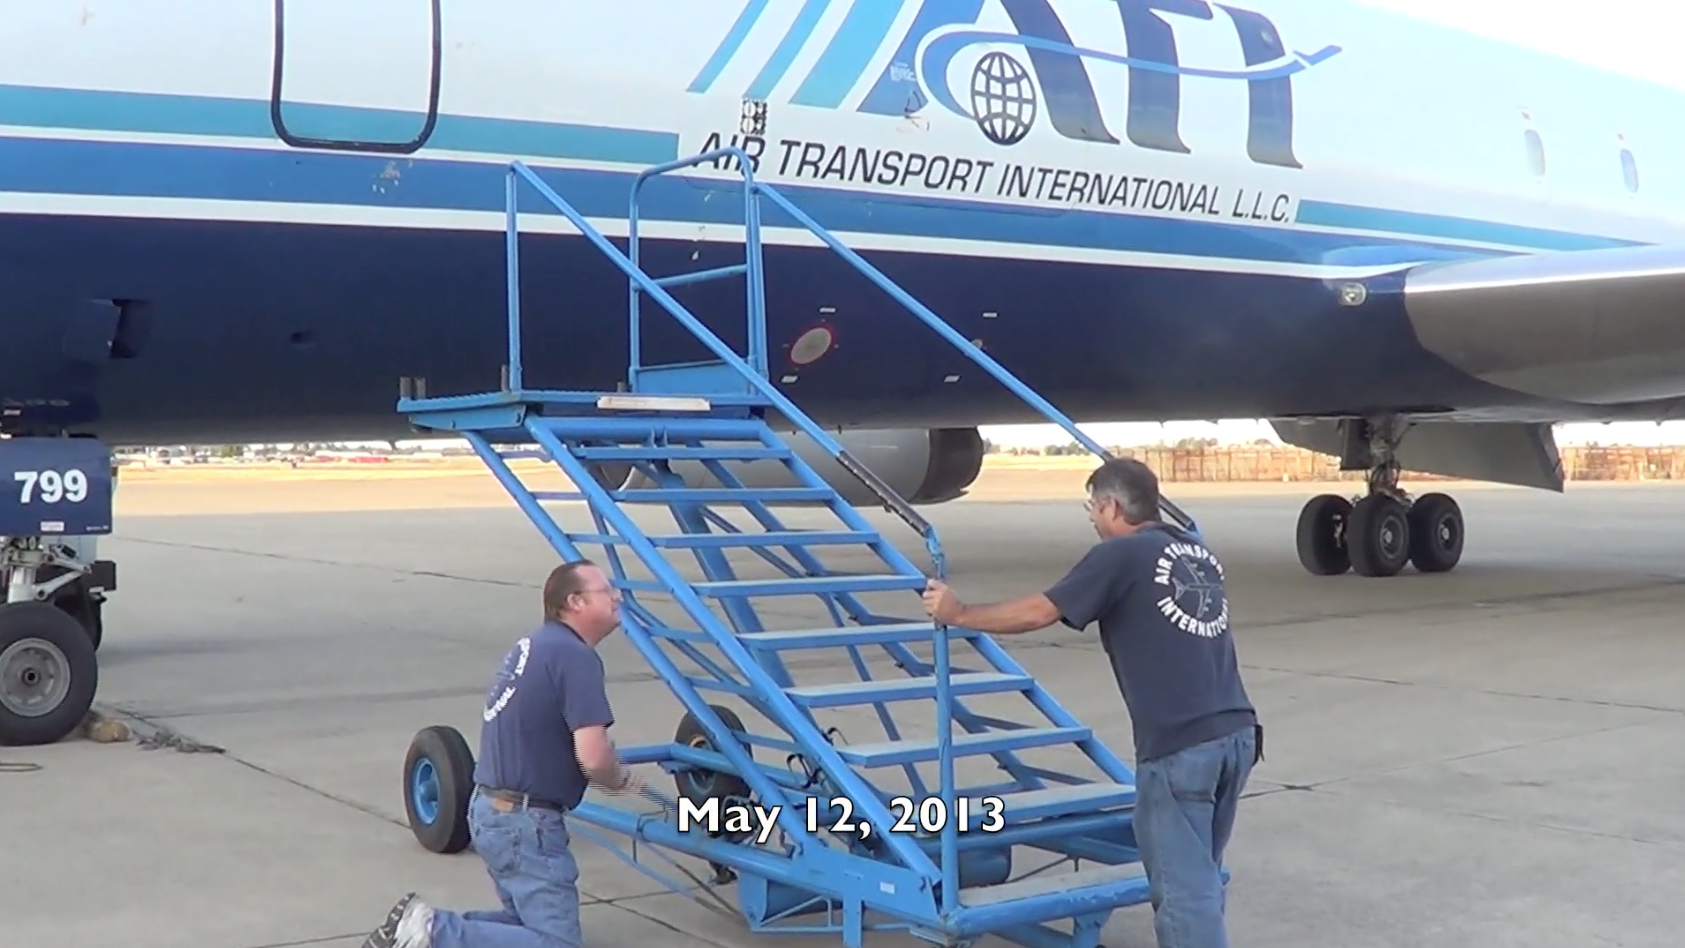 ATI DC-8-62 N799AL is prepared for its final flight within the Continental United States by ATI maintenance engineers Robert Dobler and Phil Sisco at McClellan Airport on May 12, 2013. This is a screenshot from the 9 episode mini series "DC-8 Farewell" that streams on the JetFlix TV streaming service for aviation super fans.